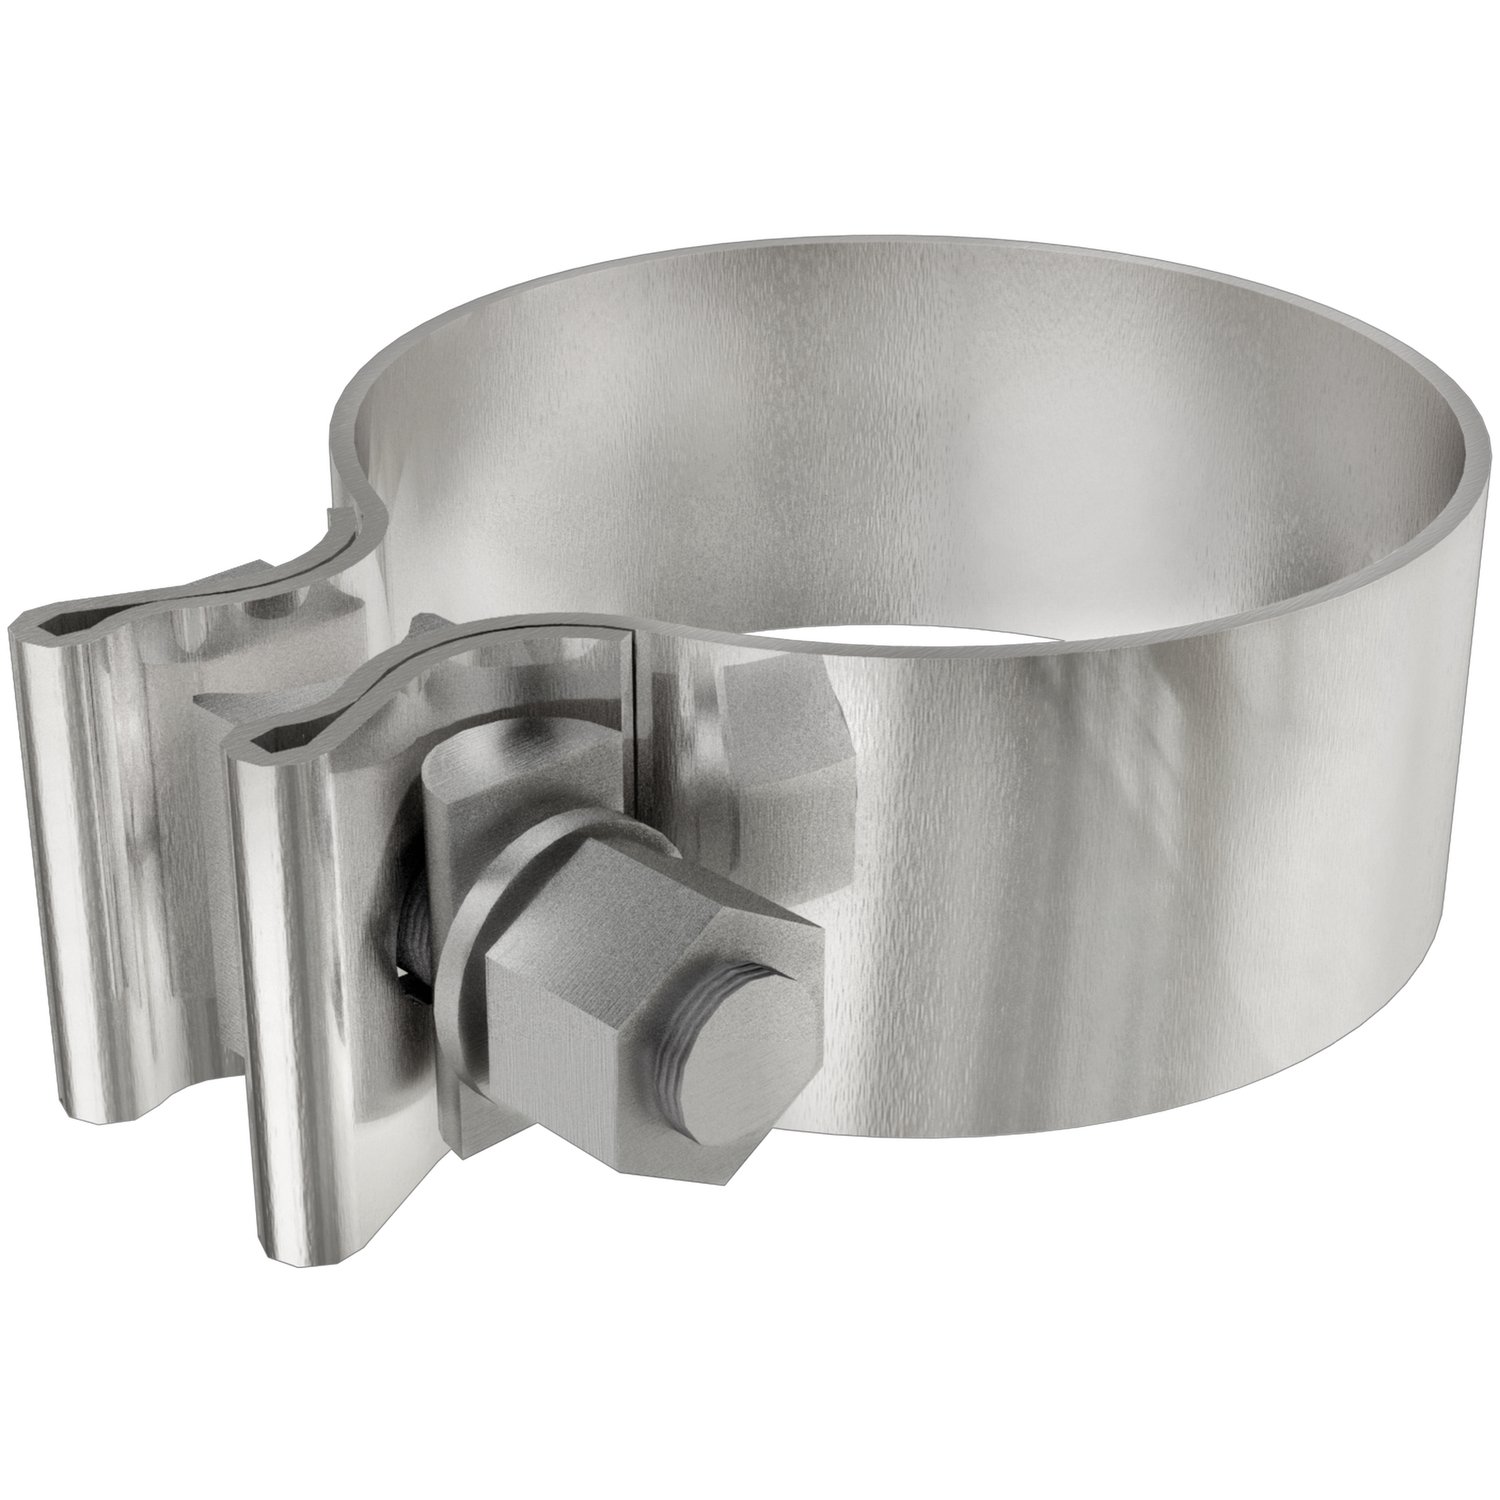 AccuSeal Stainless Steel Exhaust Band Clamps Clamp Diameter: 3"